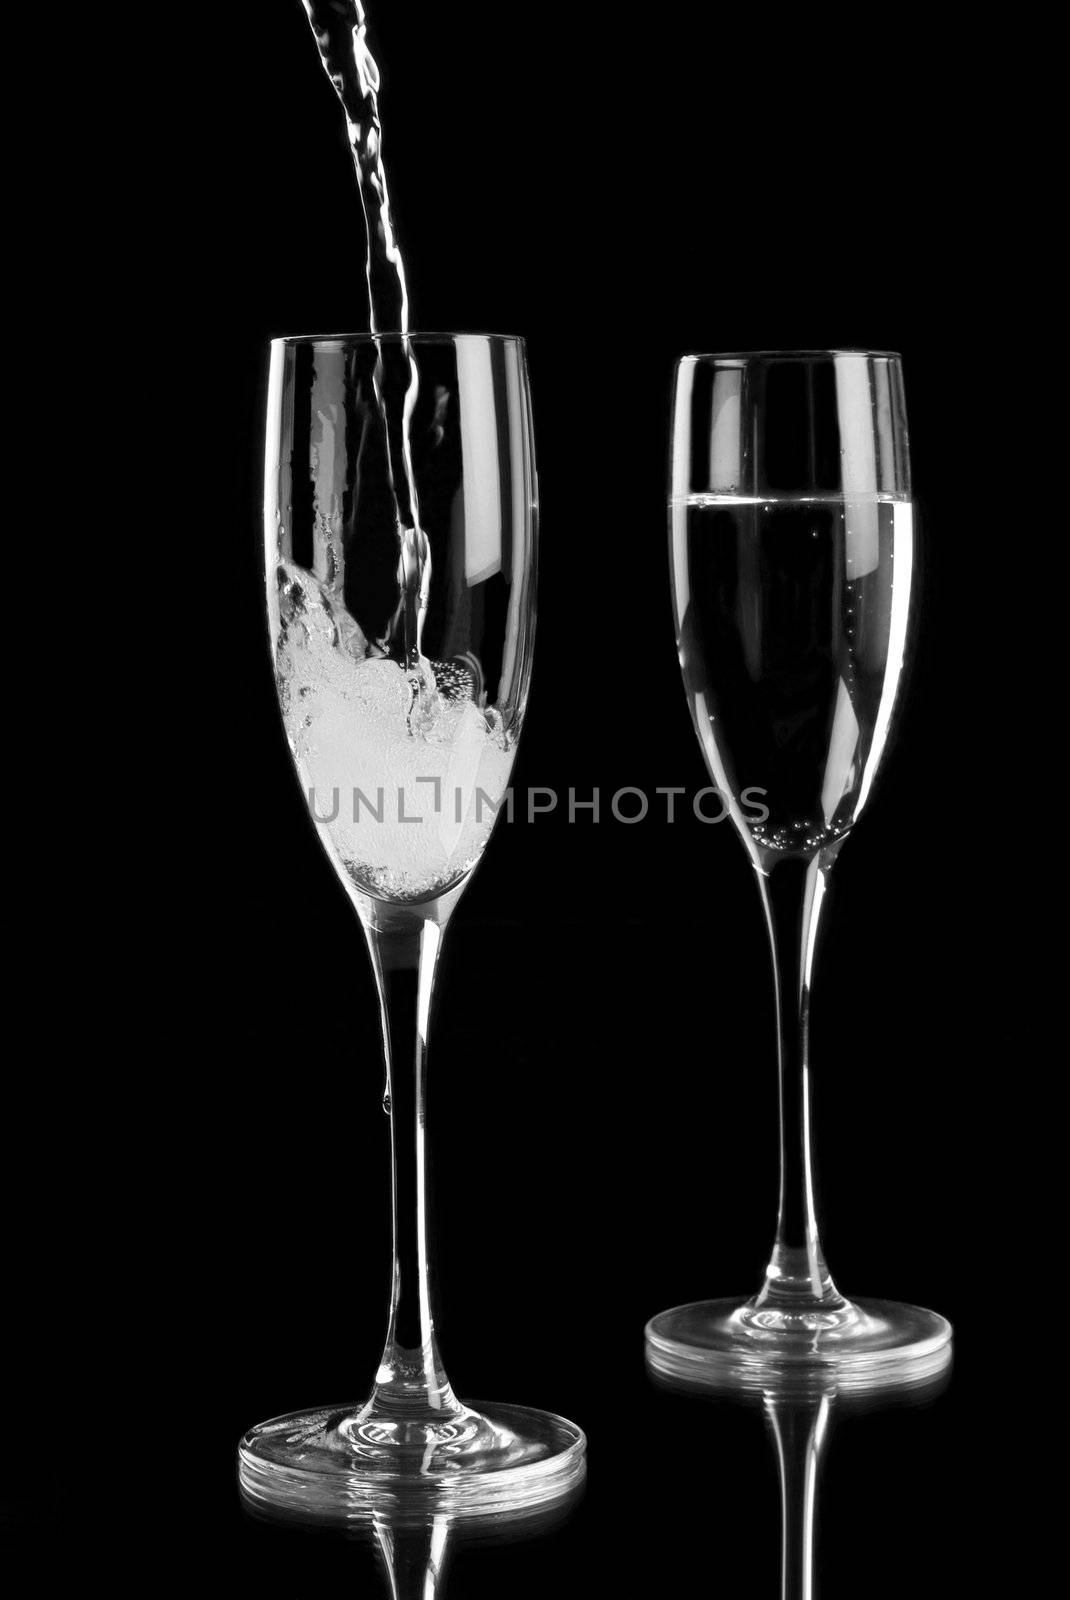 Sparkling wine poured into champagne flutes by alistaircotton